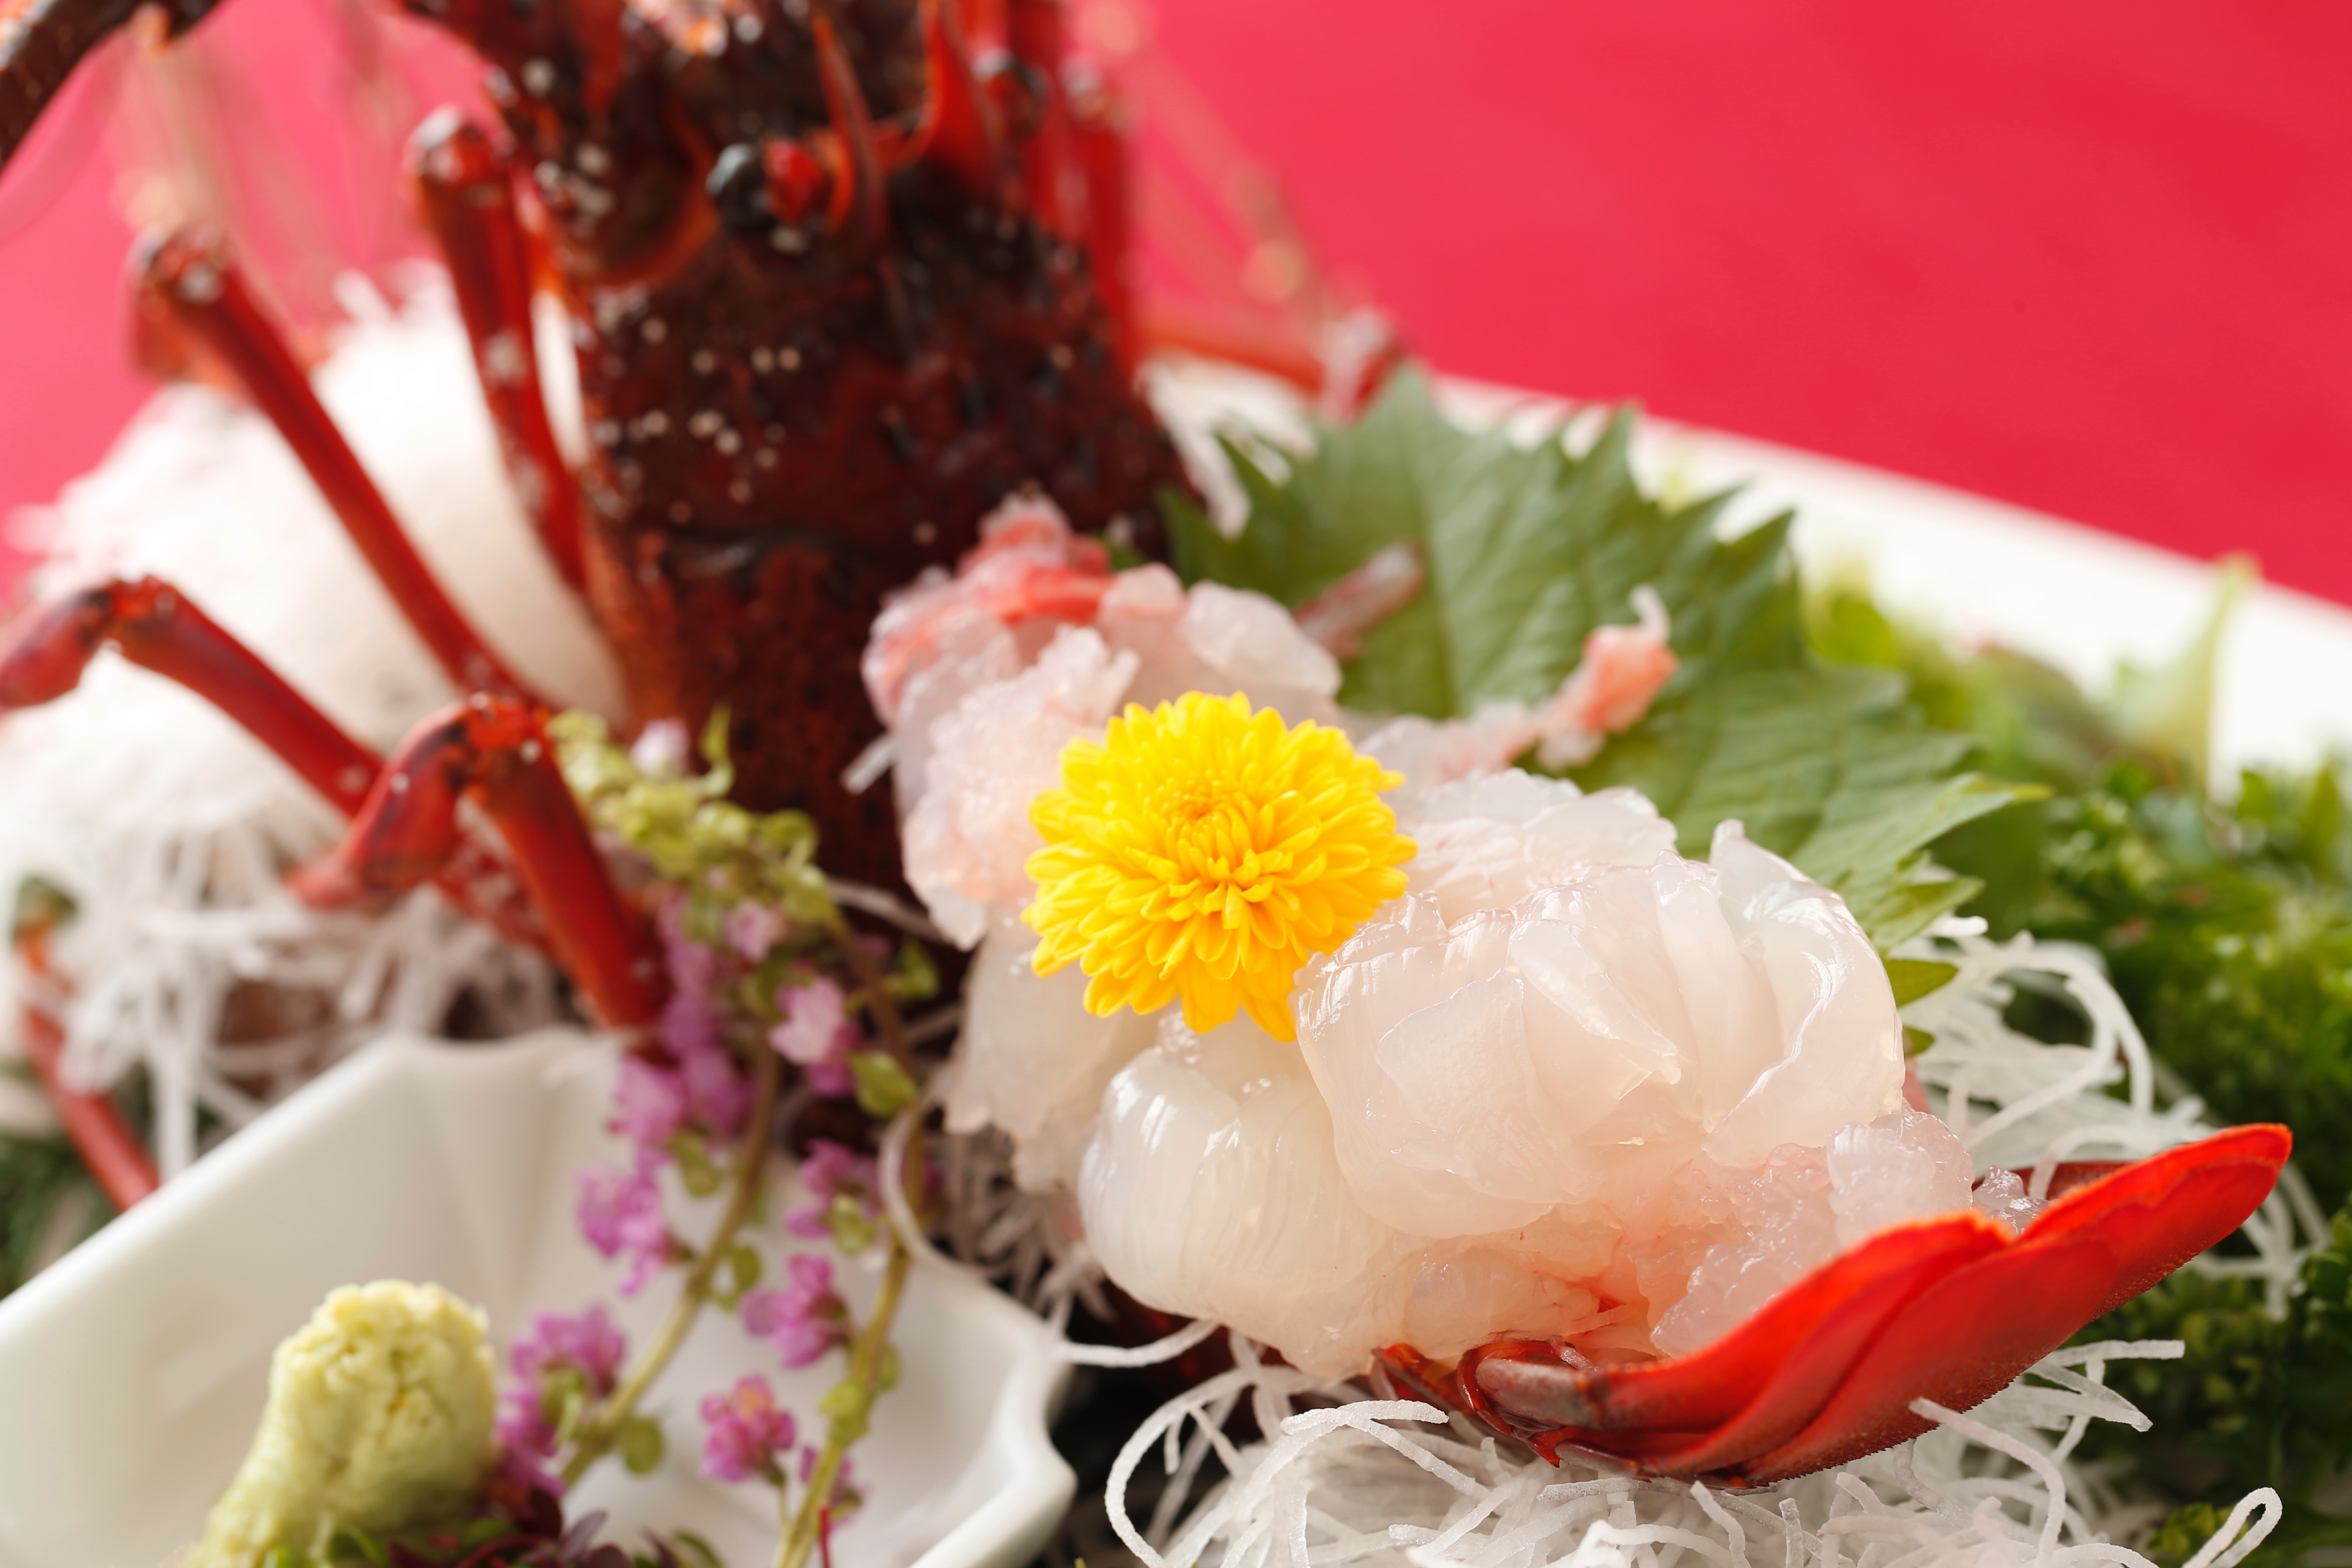 An example of spiny lobster sashimi